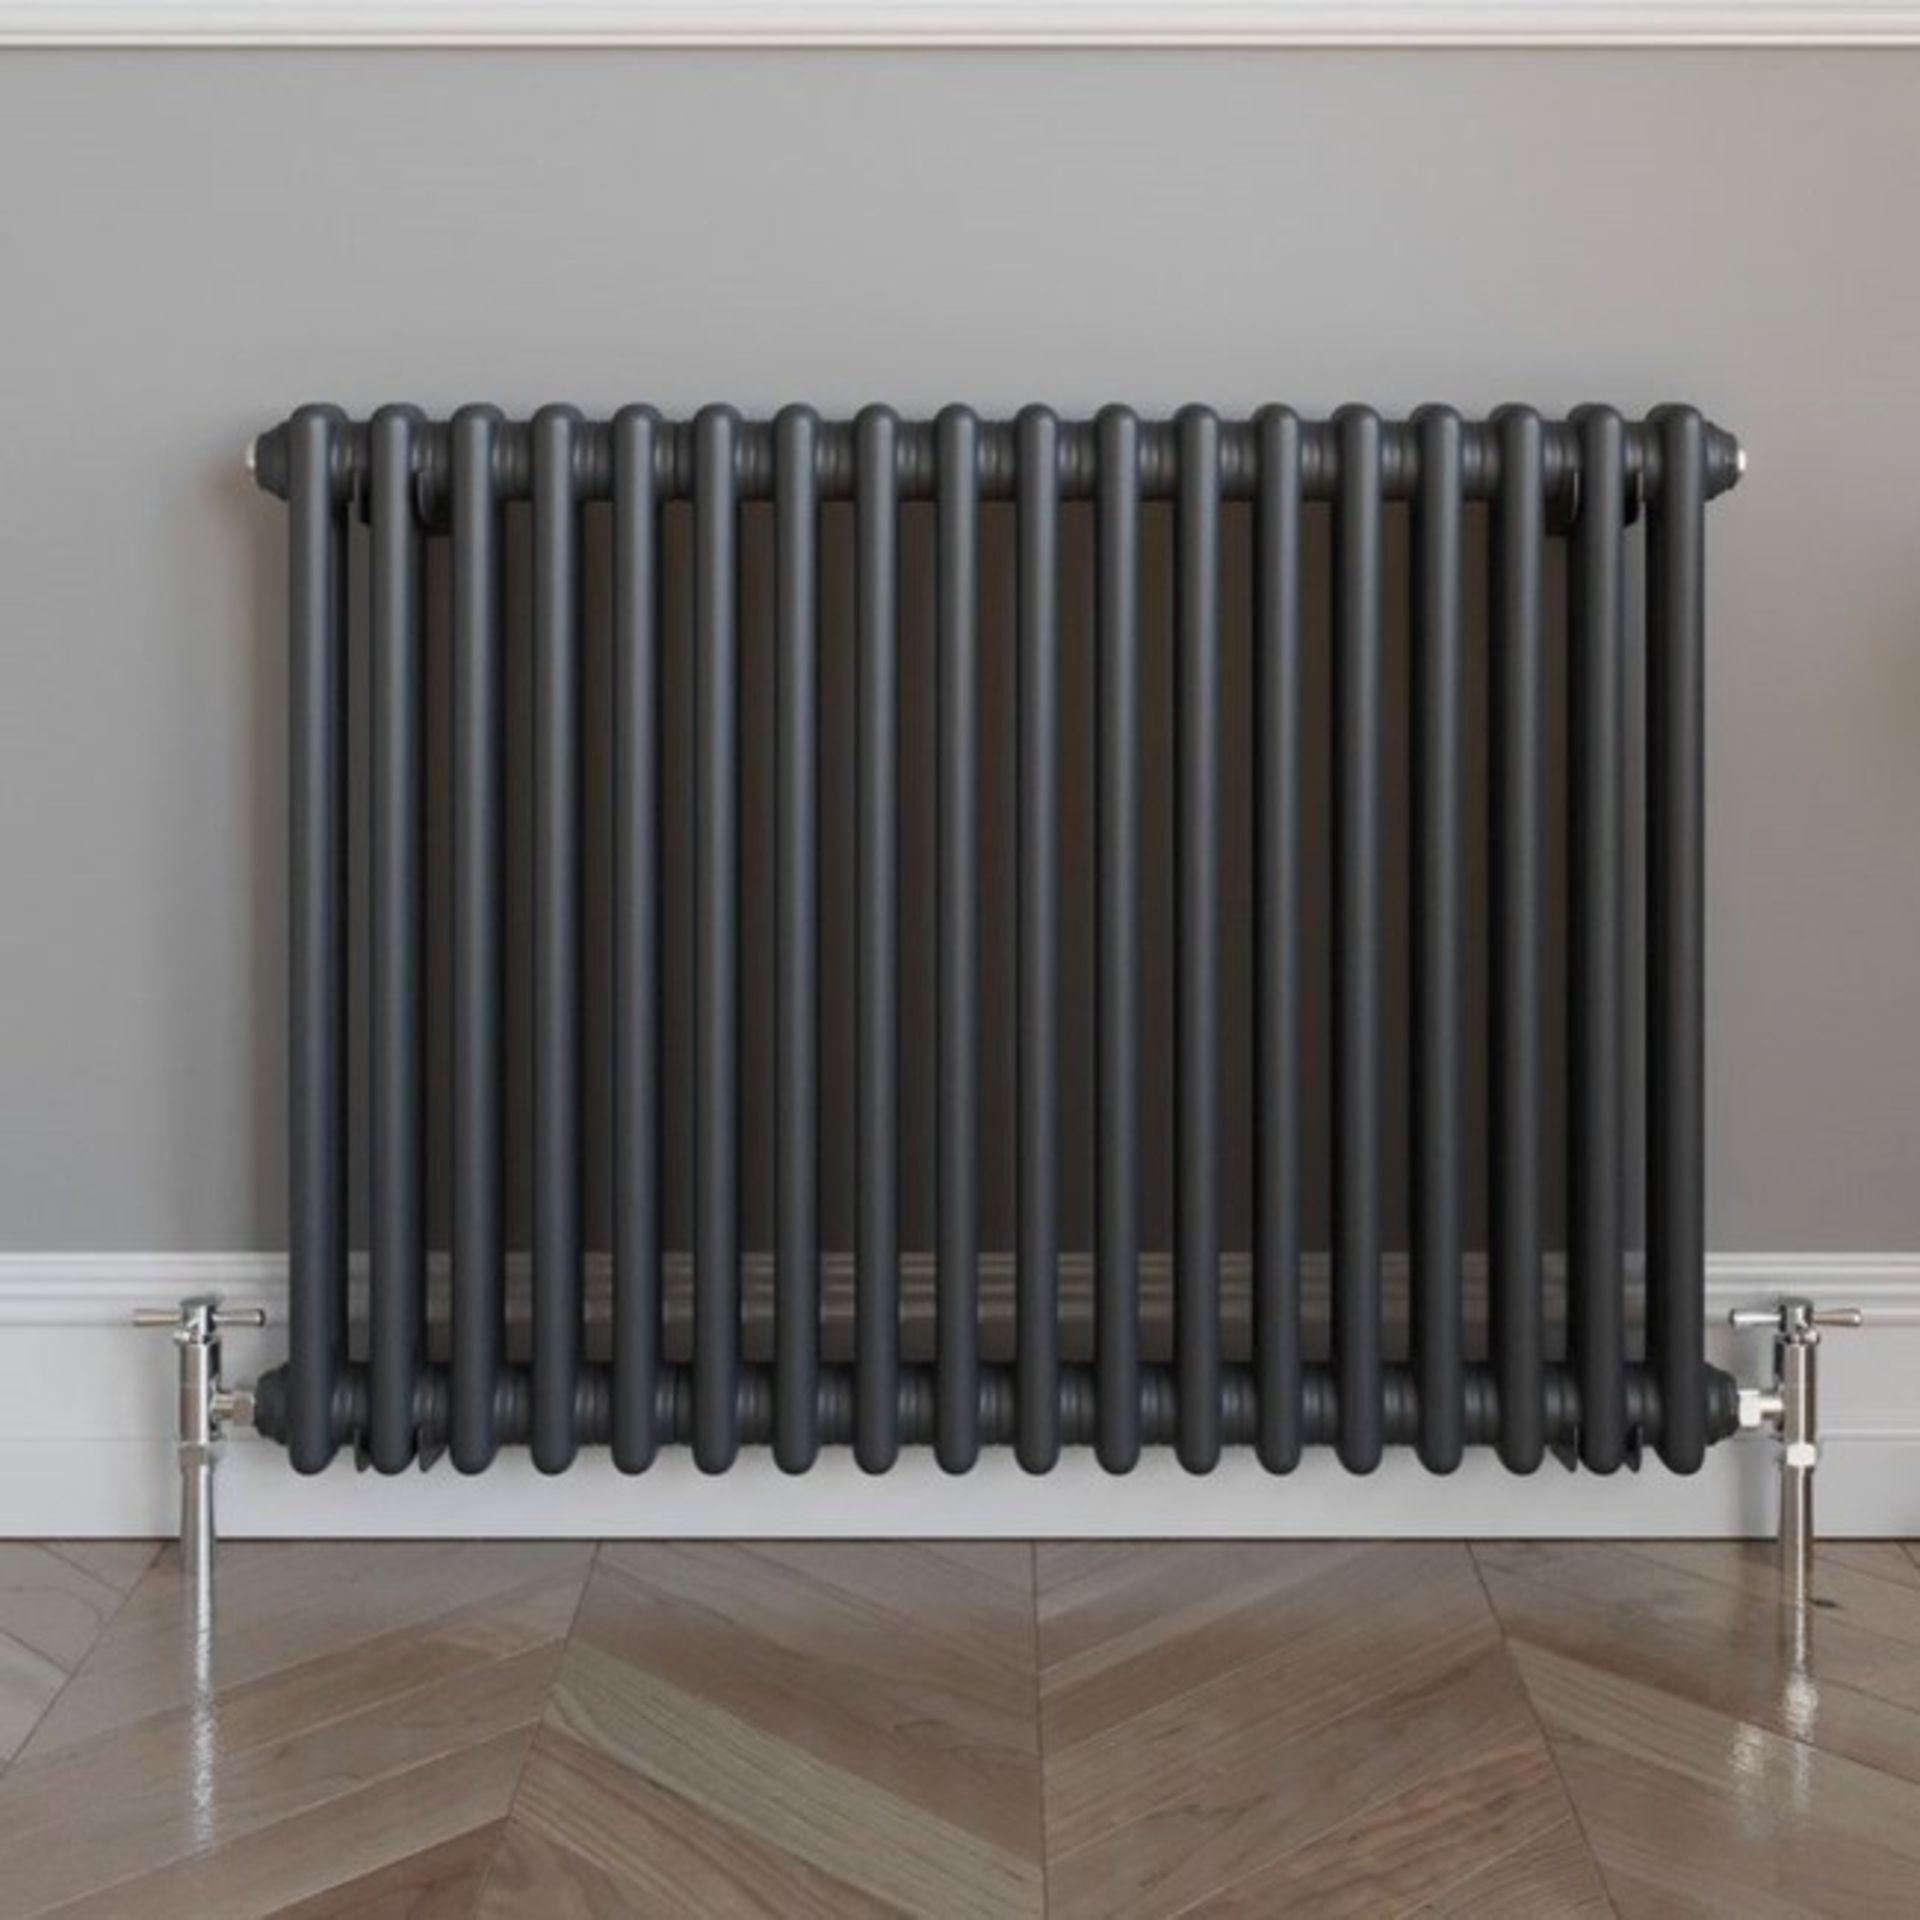 New 600x828mm Anthracite Double Panel Horizontal Colosseum Traditional Radiator.RCA563.RRP £542.99. - Image 3 of 3